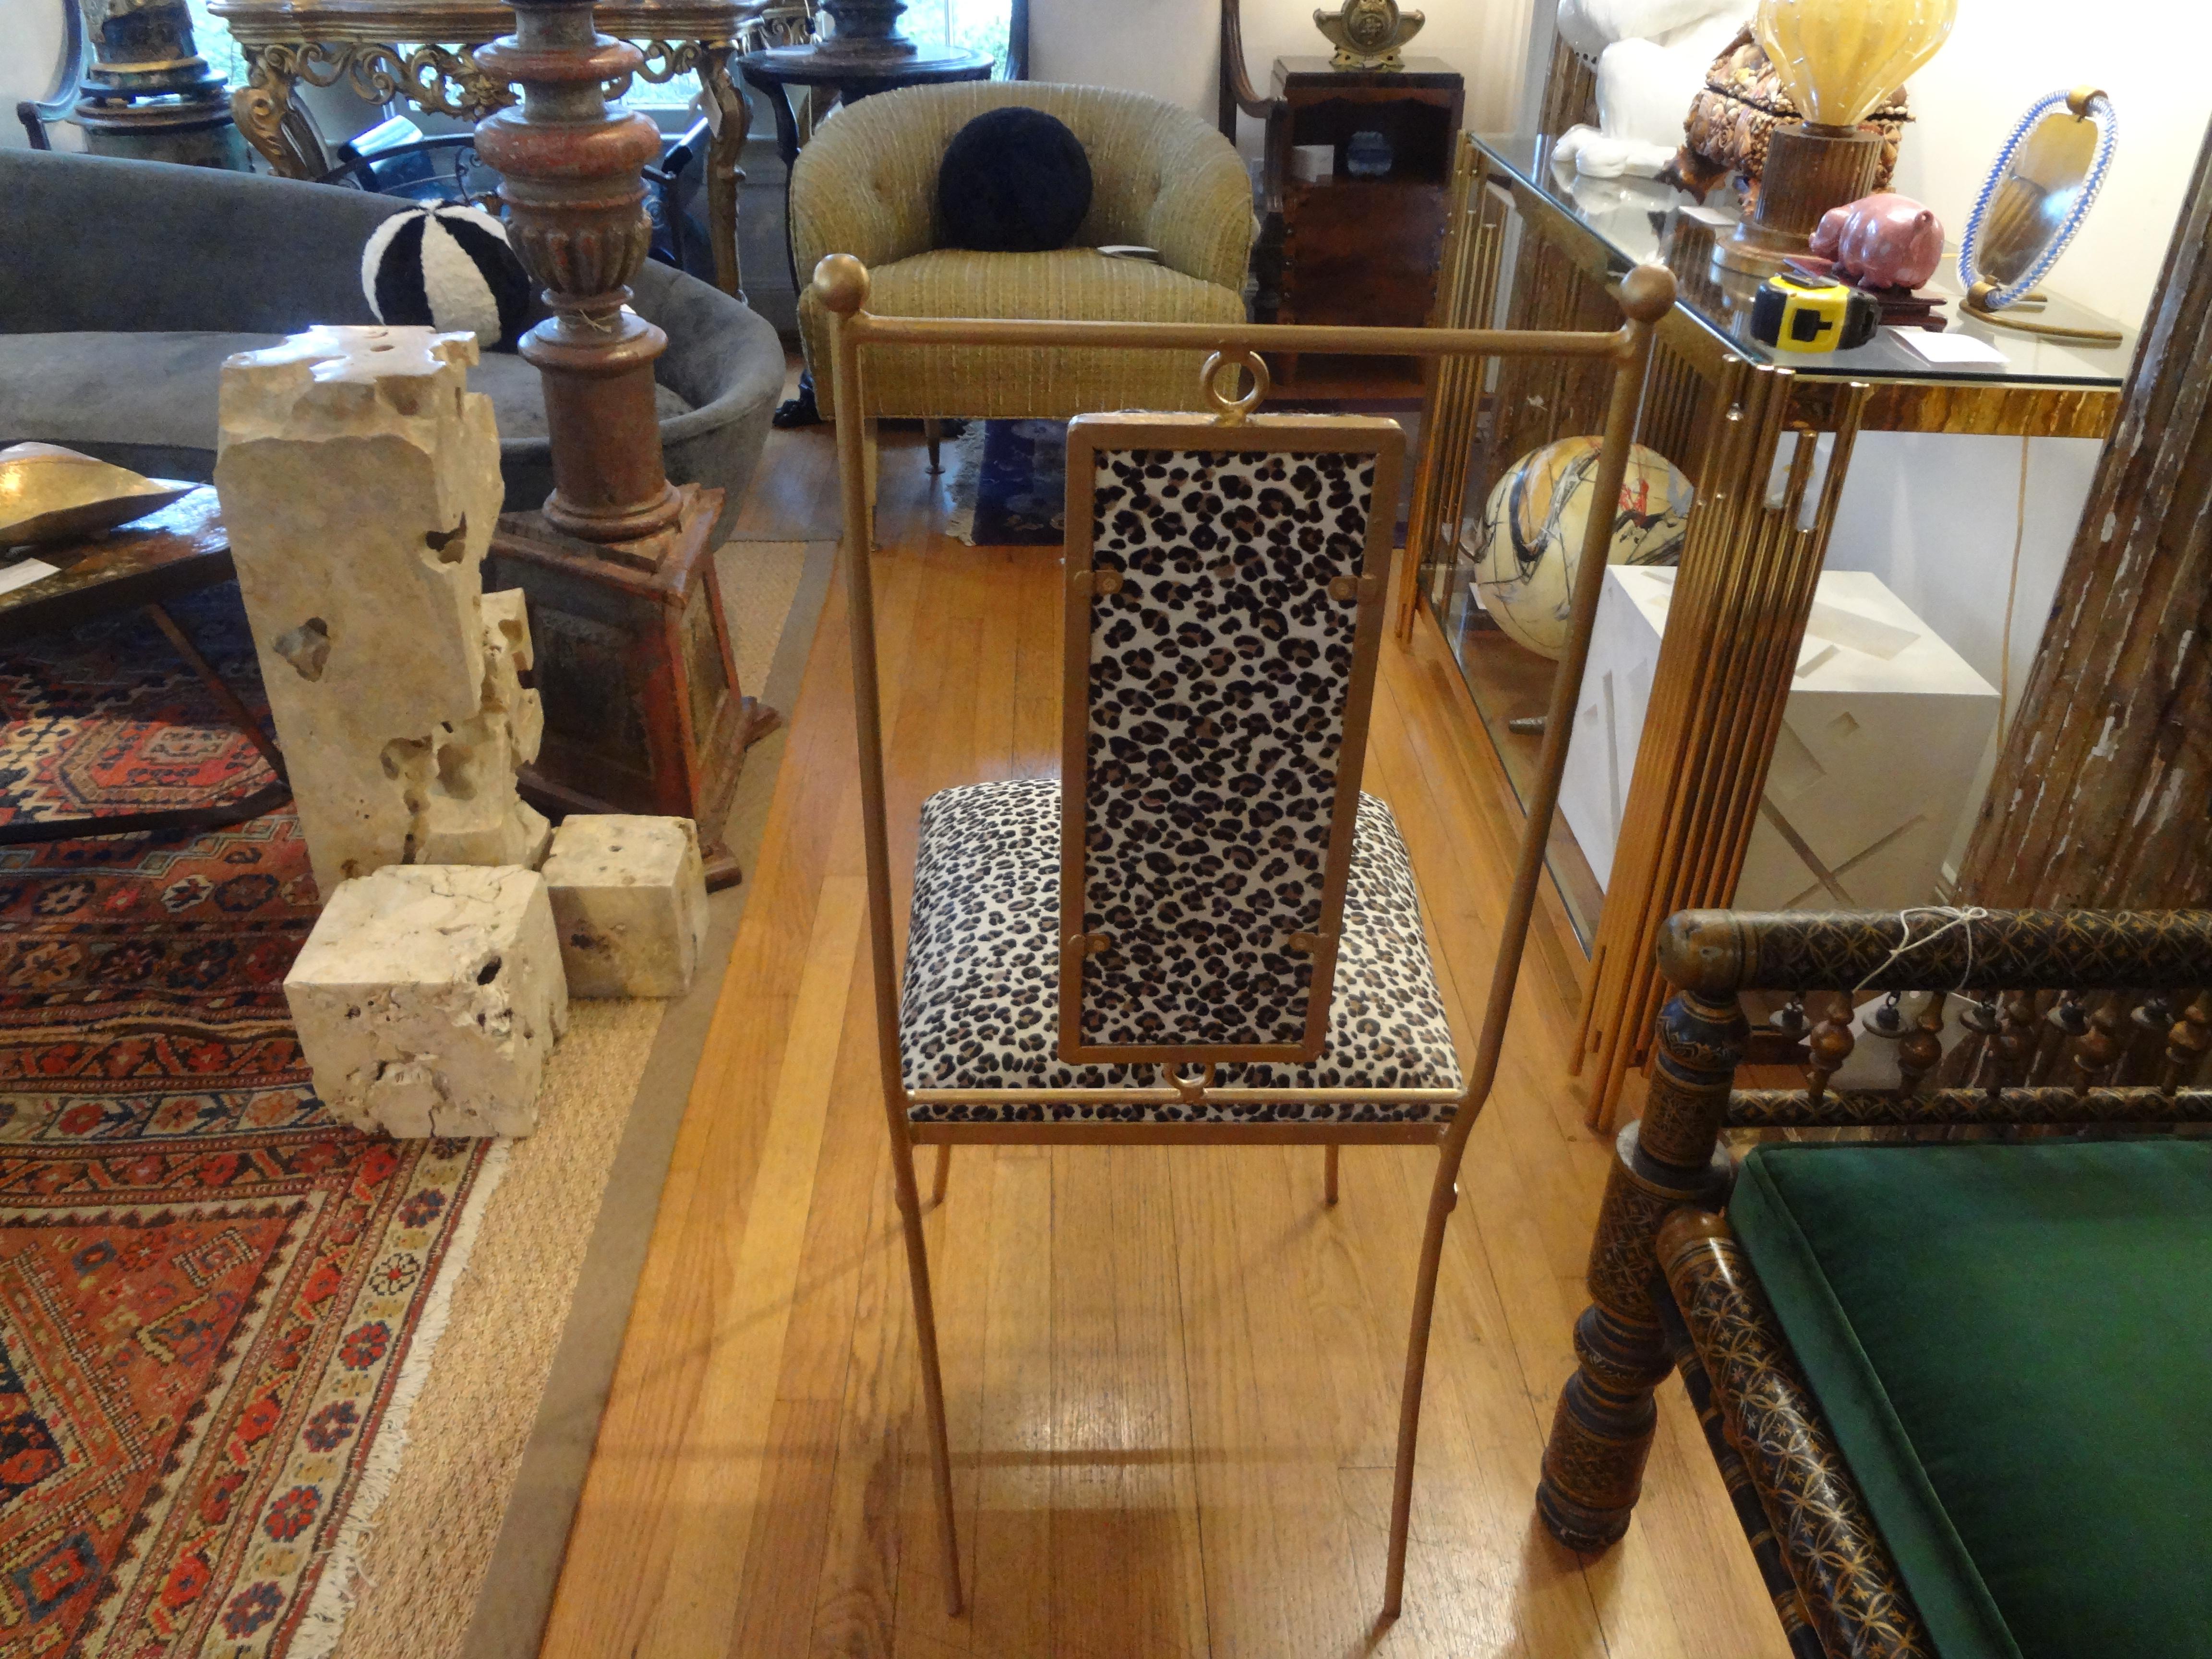 Italian Gilt Iron Chair with Leopard Print Hide Upholstery, Gio Ponti Inspired 1